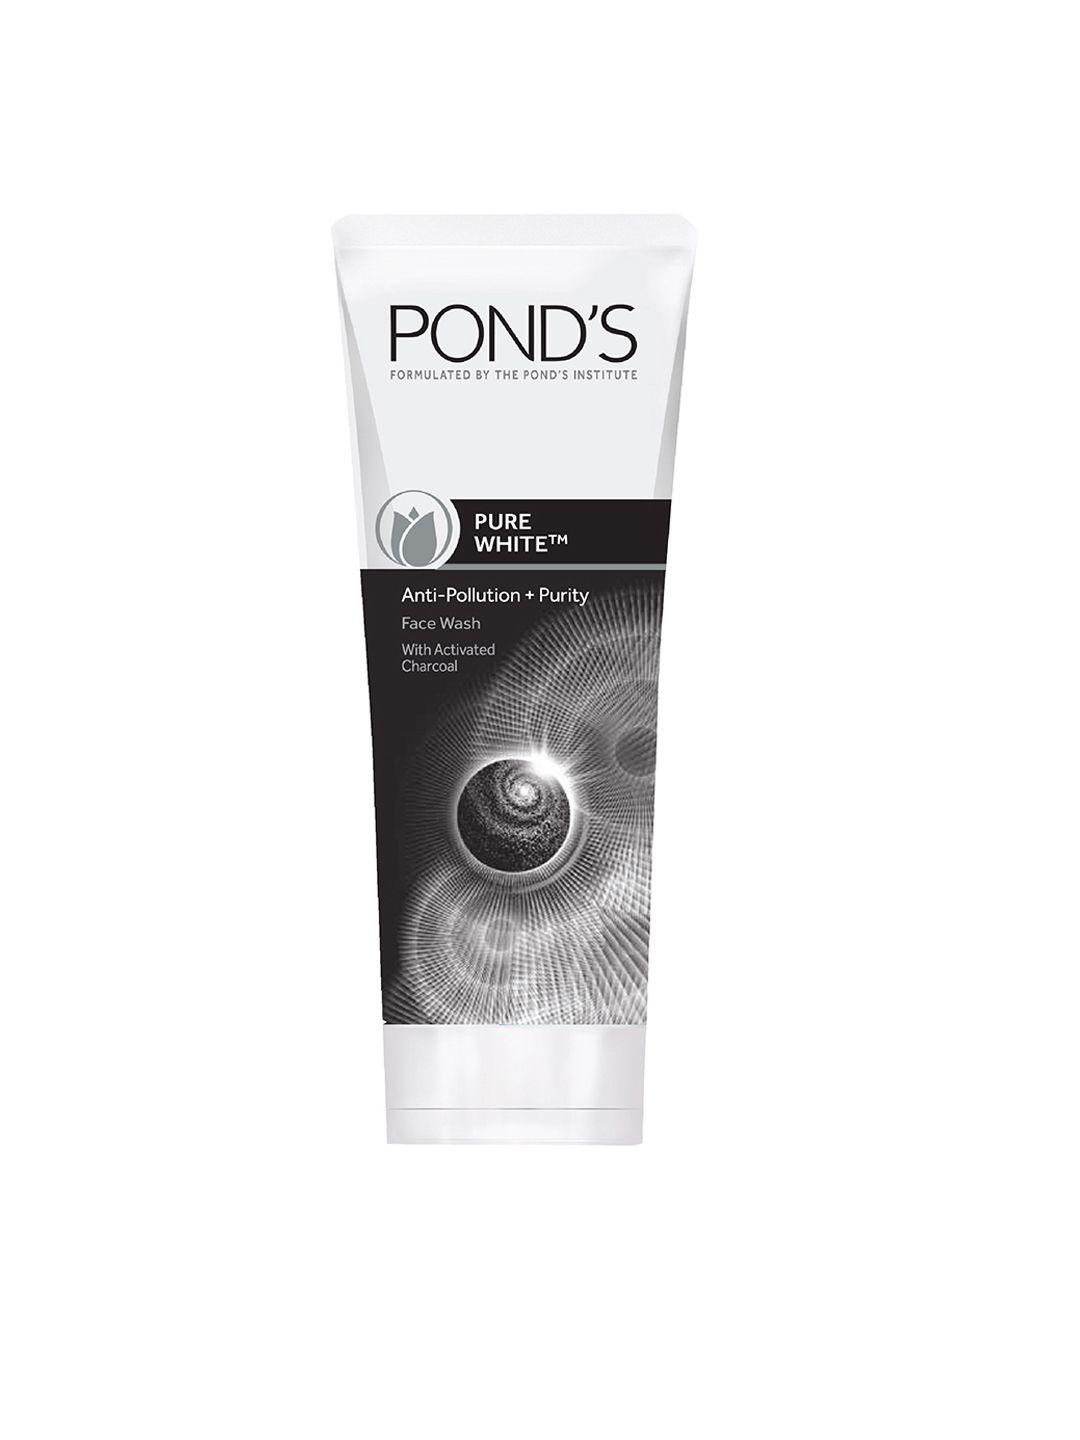 Ponds Pure Detox Anti-Pollution With Activated Charcoal Purity Face Wash - 15 g